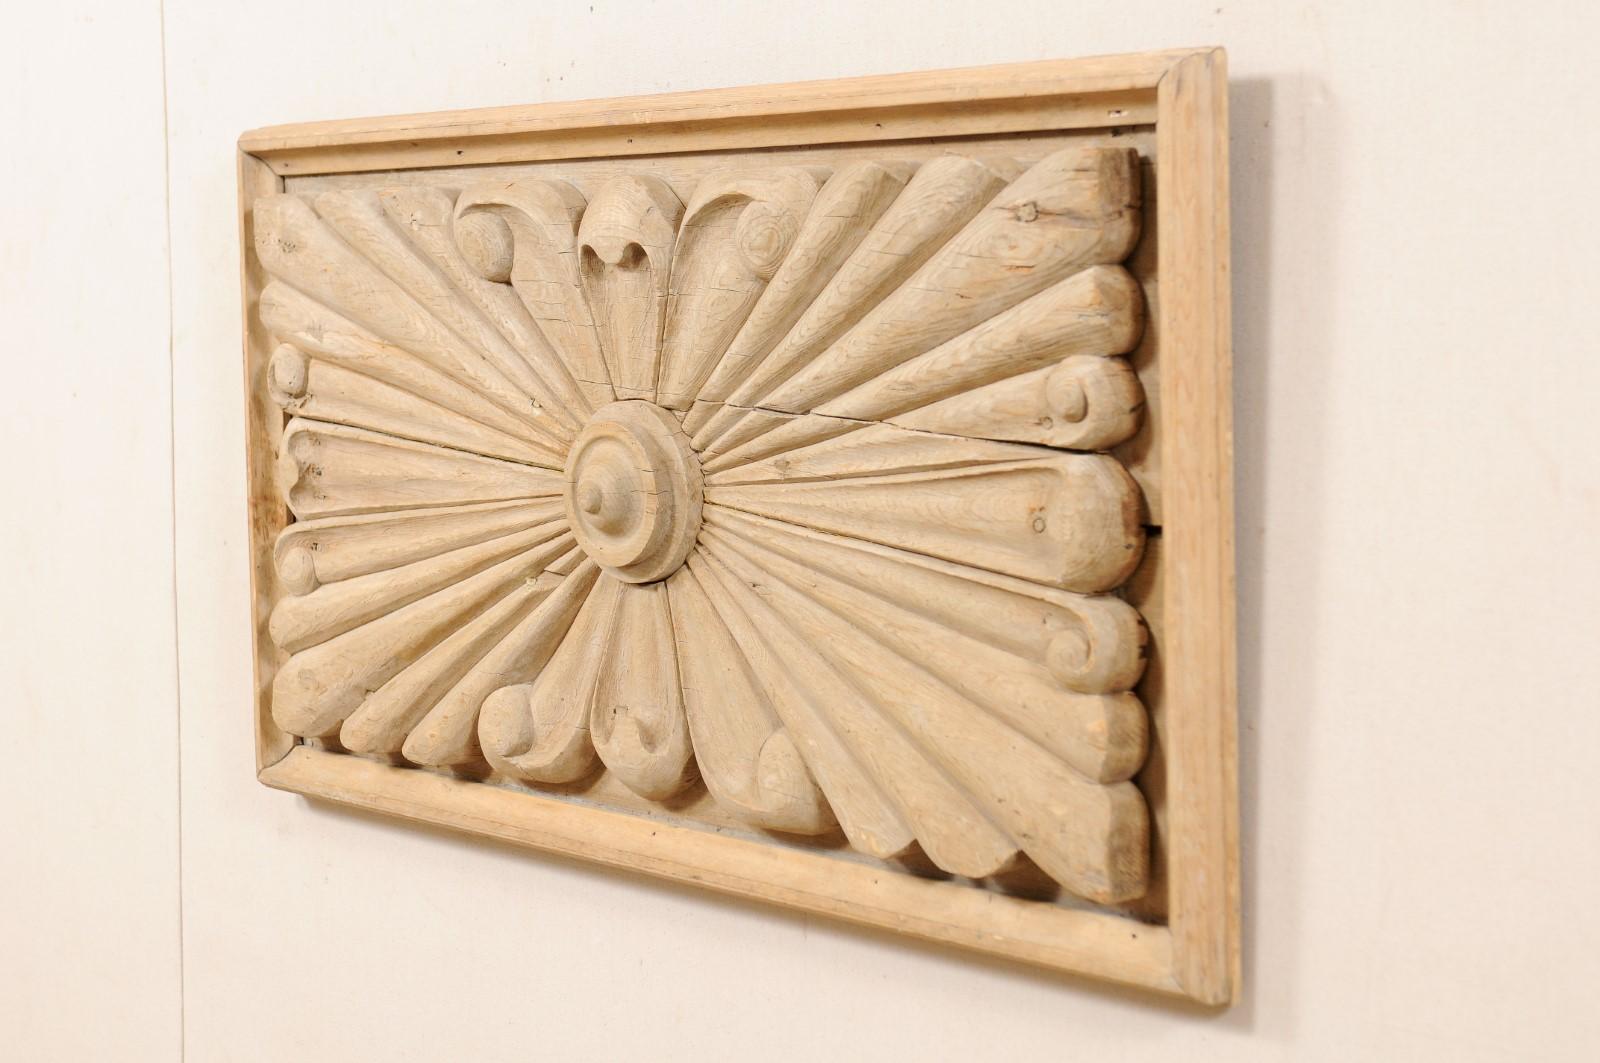 Spanish Carved Wood Wall Plaque from the Early 20th Century in Natural Finish 4